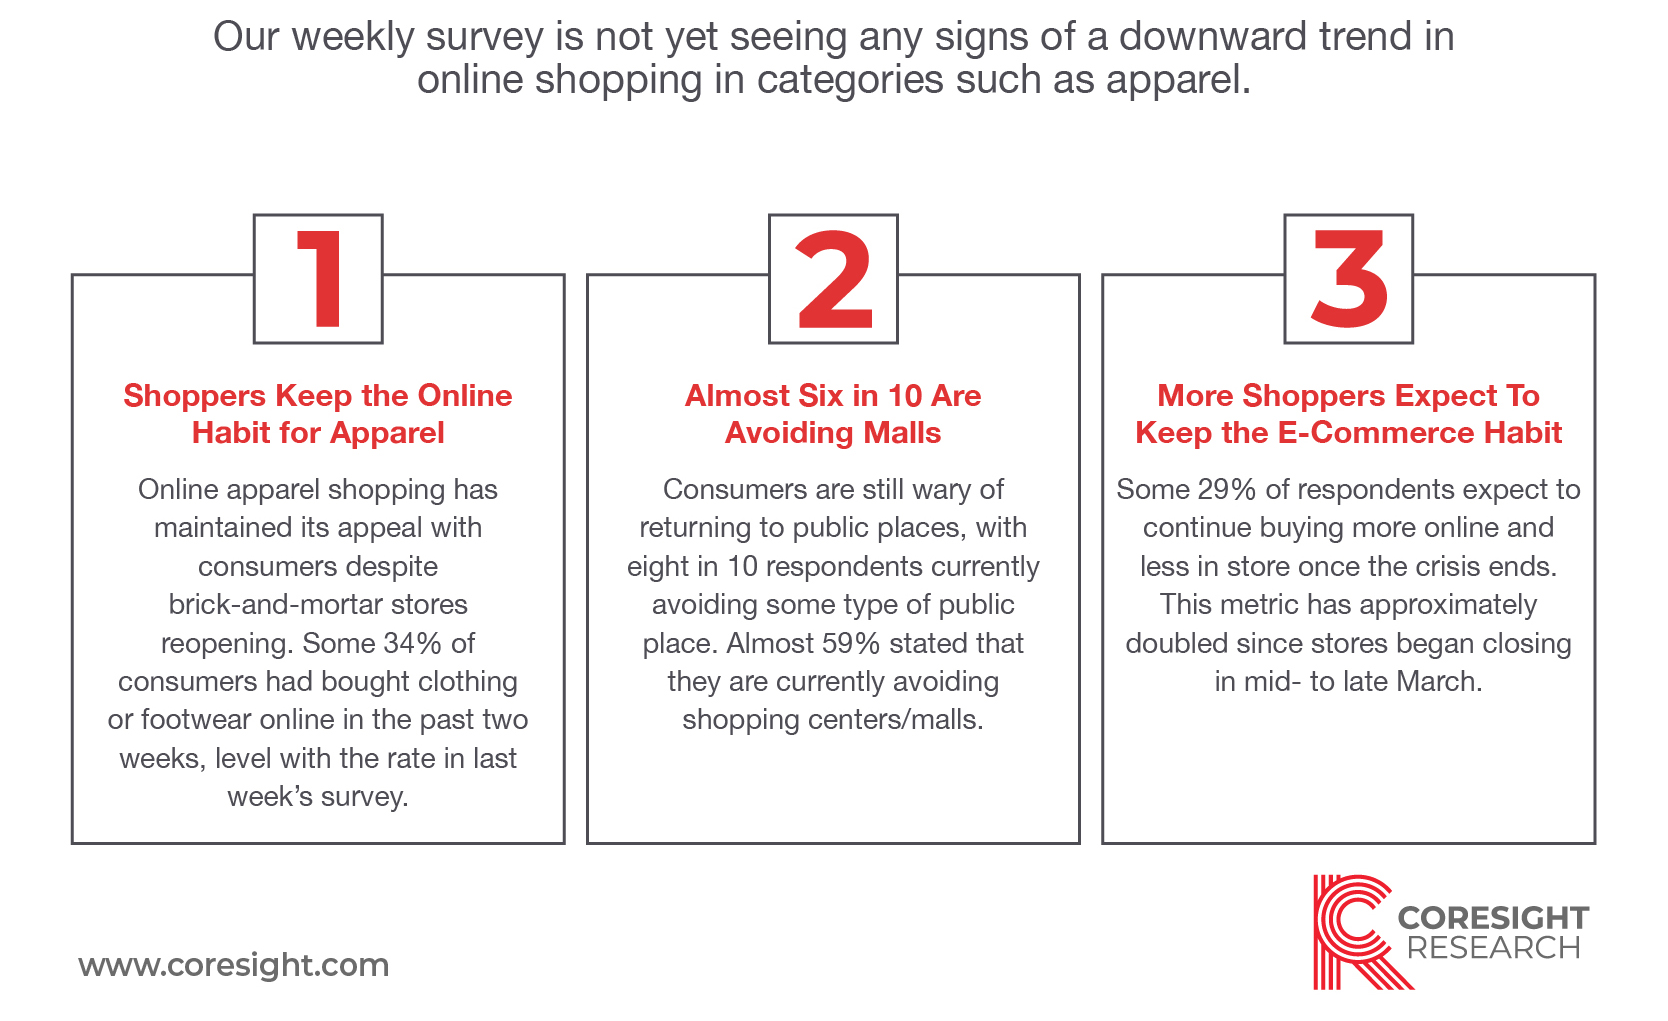 Coronavirus Insights: US Survey Update—Online Apparel Shopping Retains Its Appeal Even as Stores Reopen